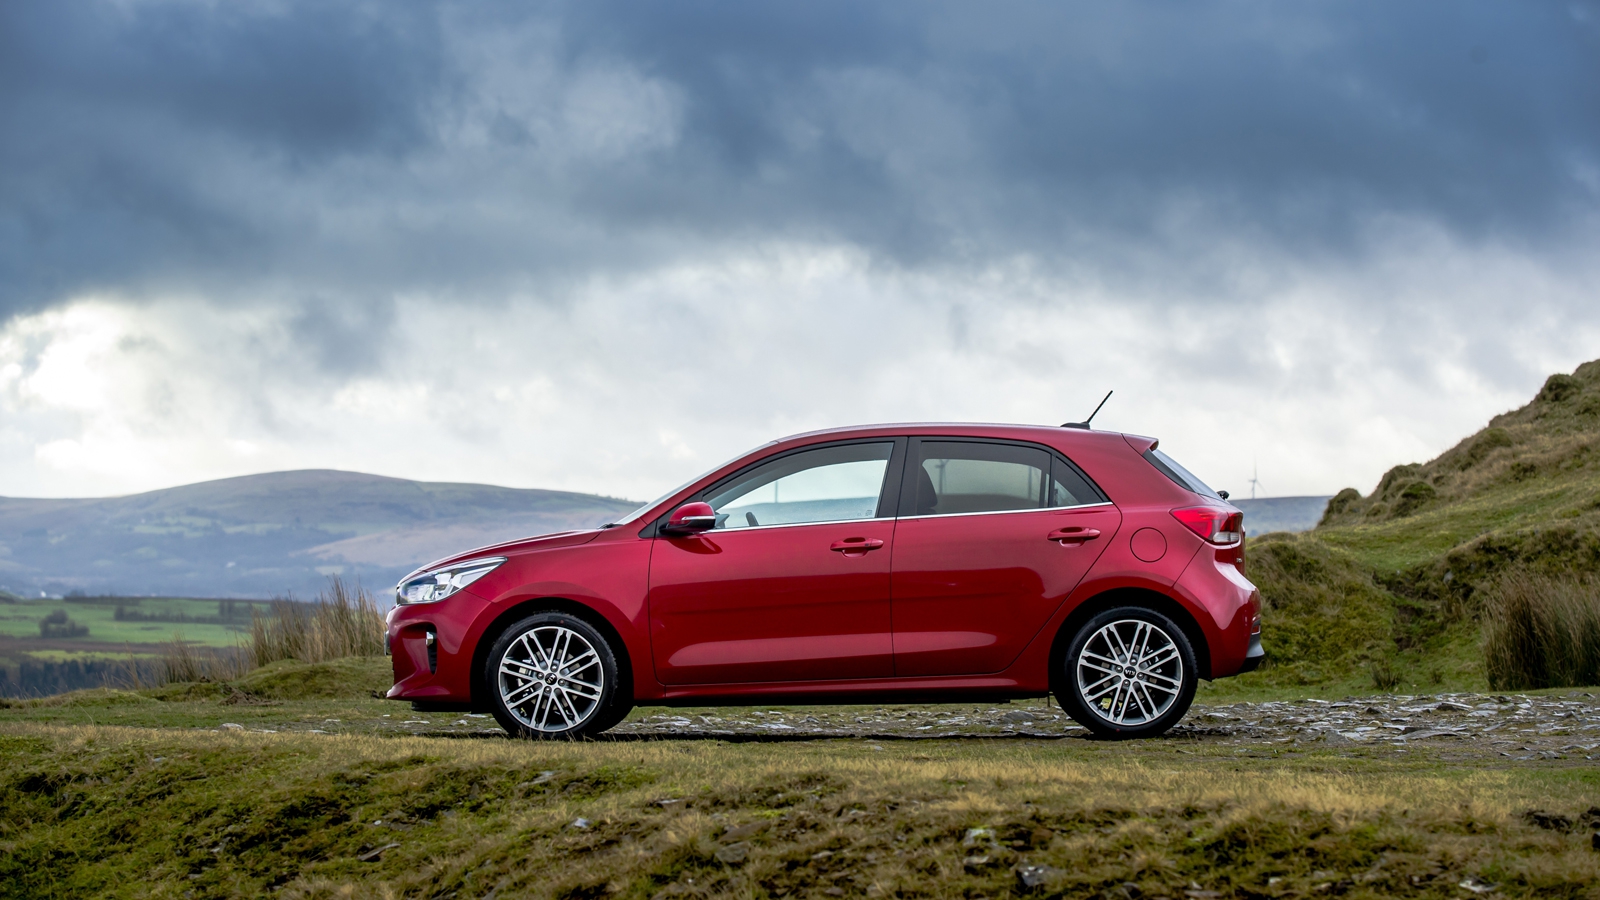 Can Kia take on the Ford Fiesta with the new Rio?